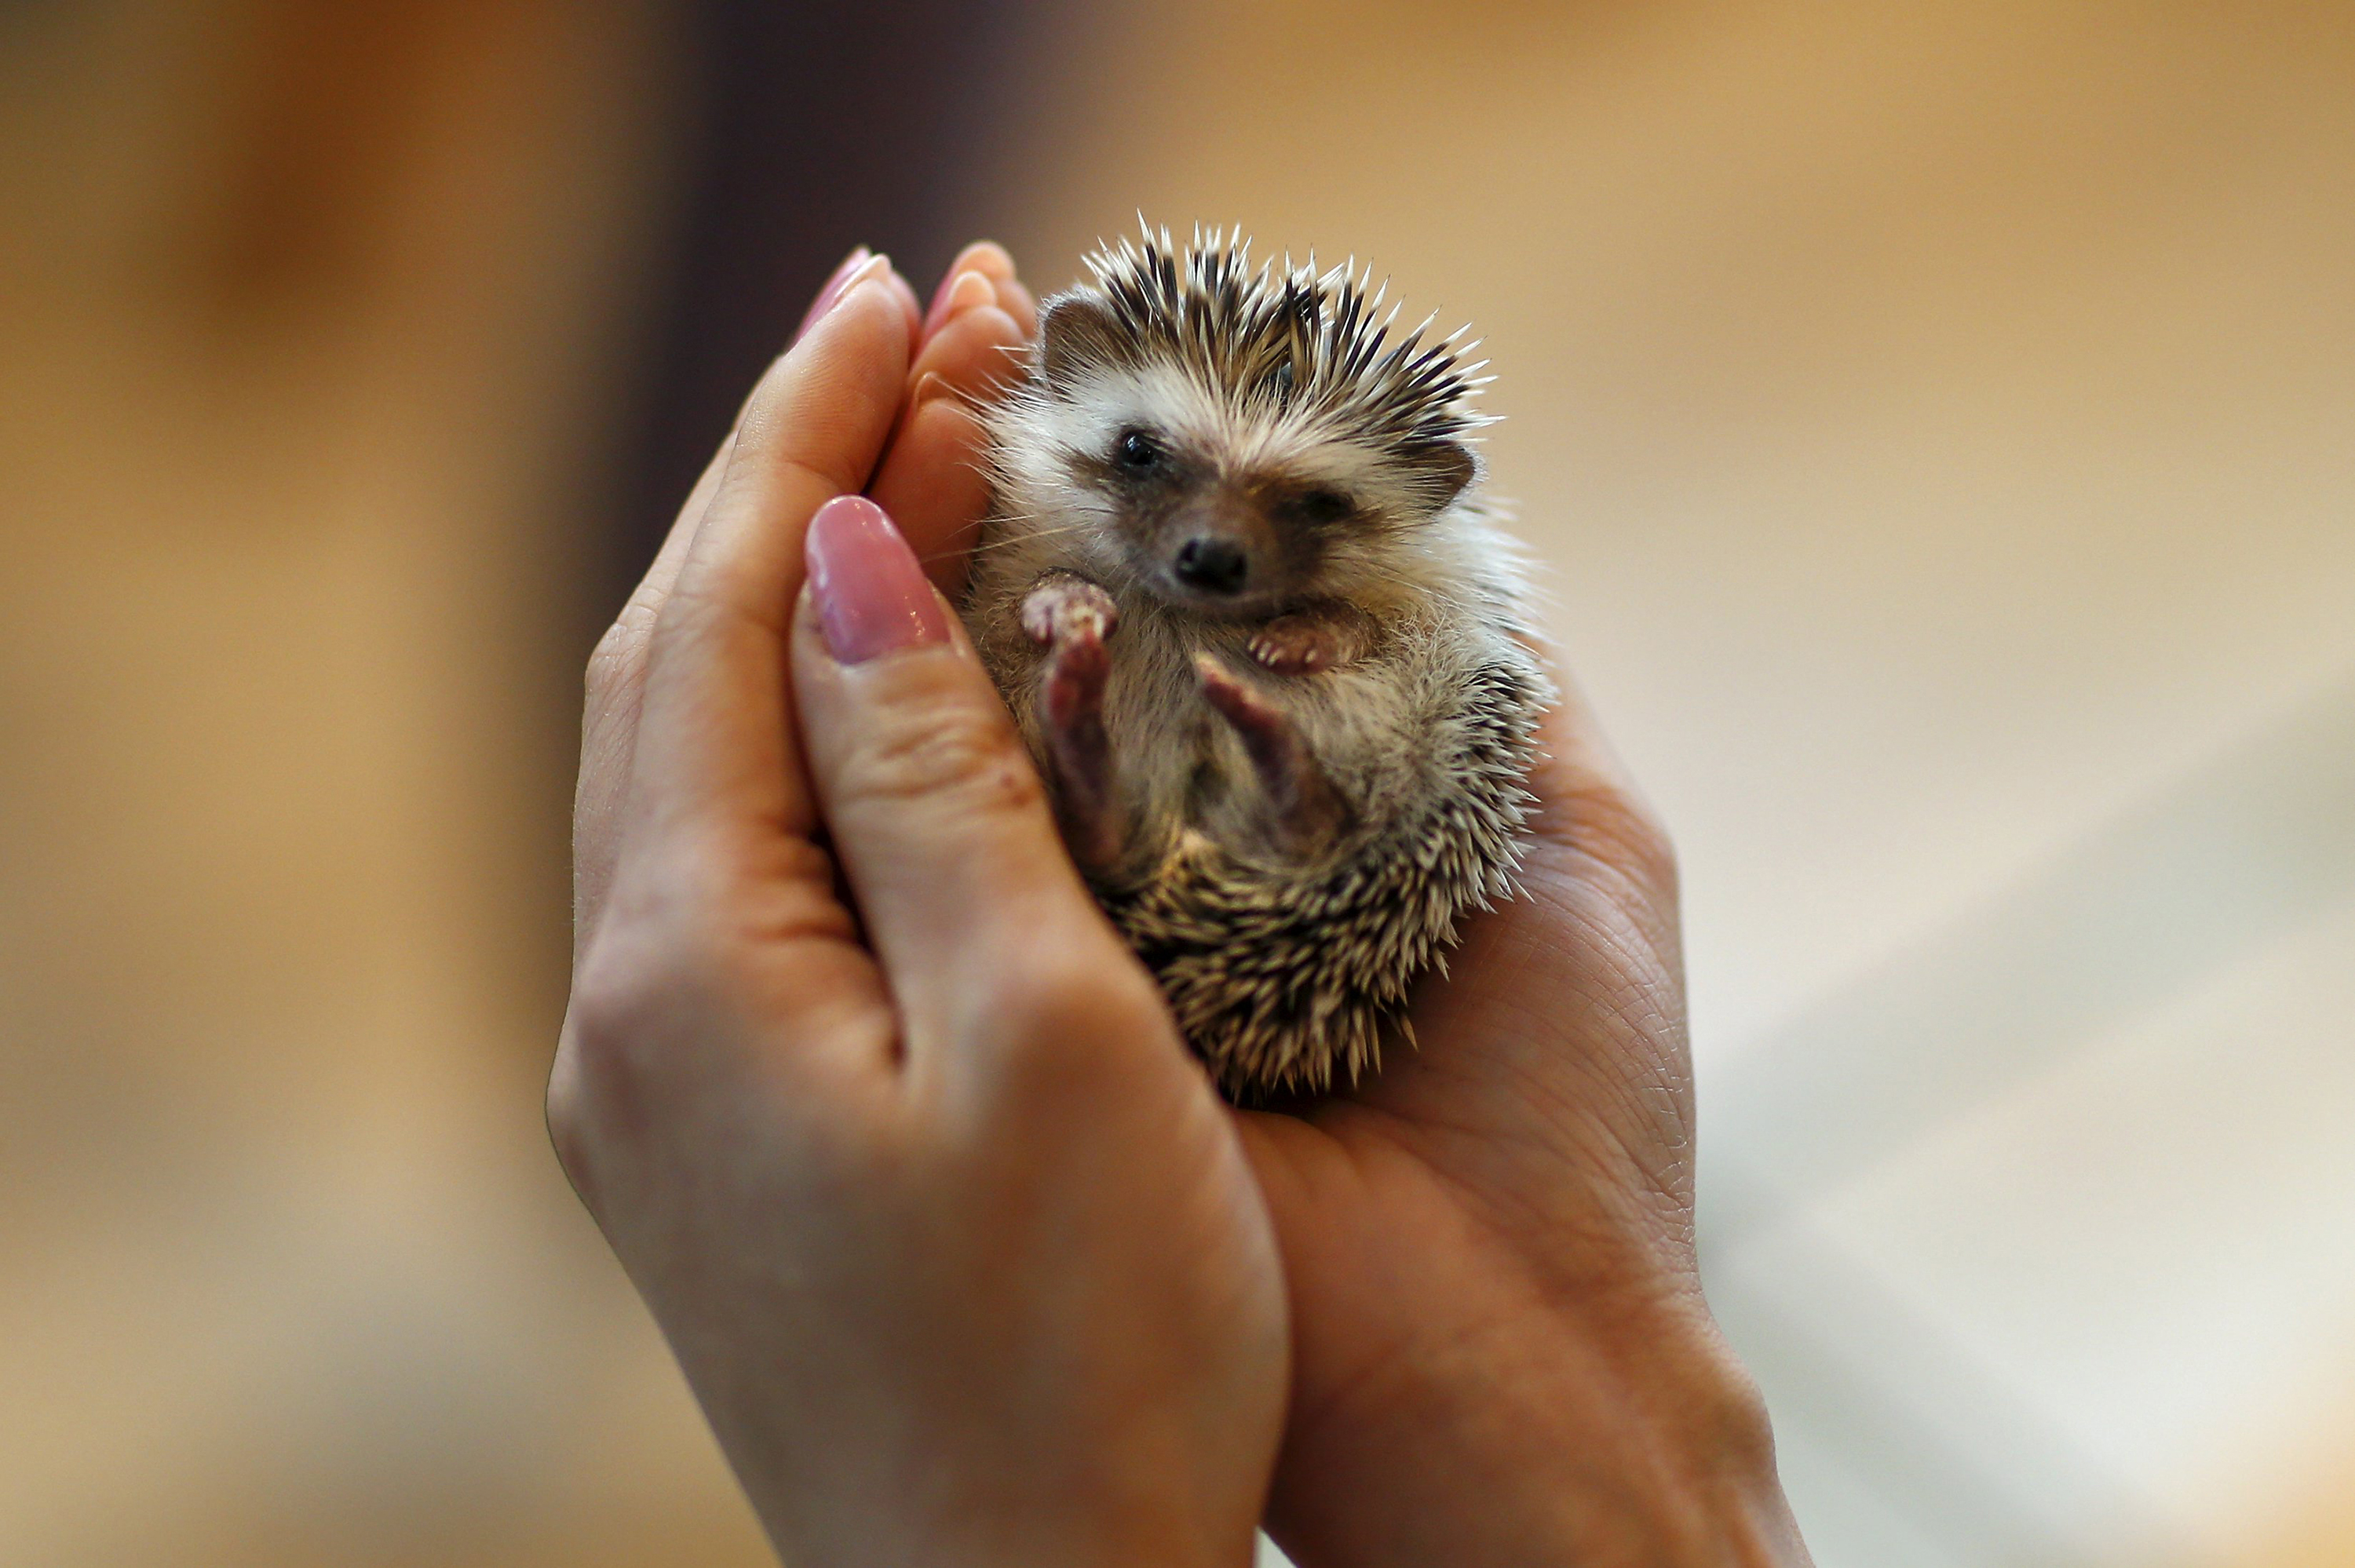 Japan's first hedgehog-themed cafe opens in Tokyo | The Japan Times